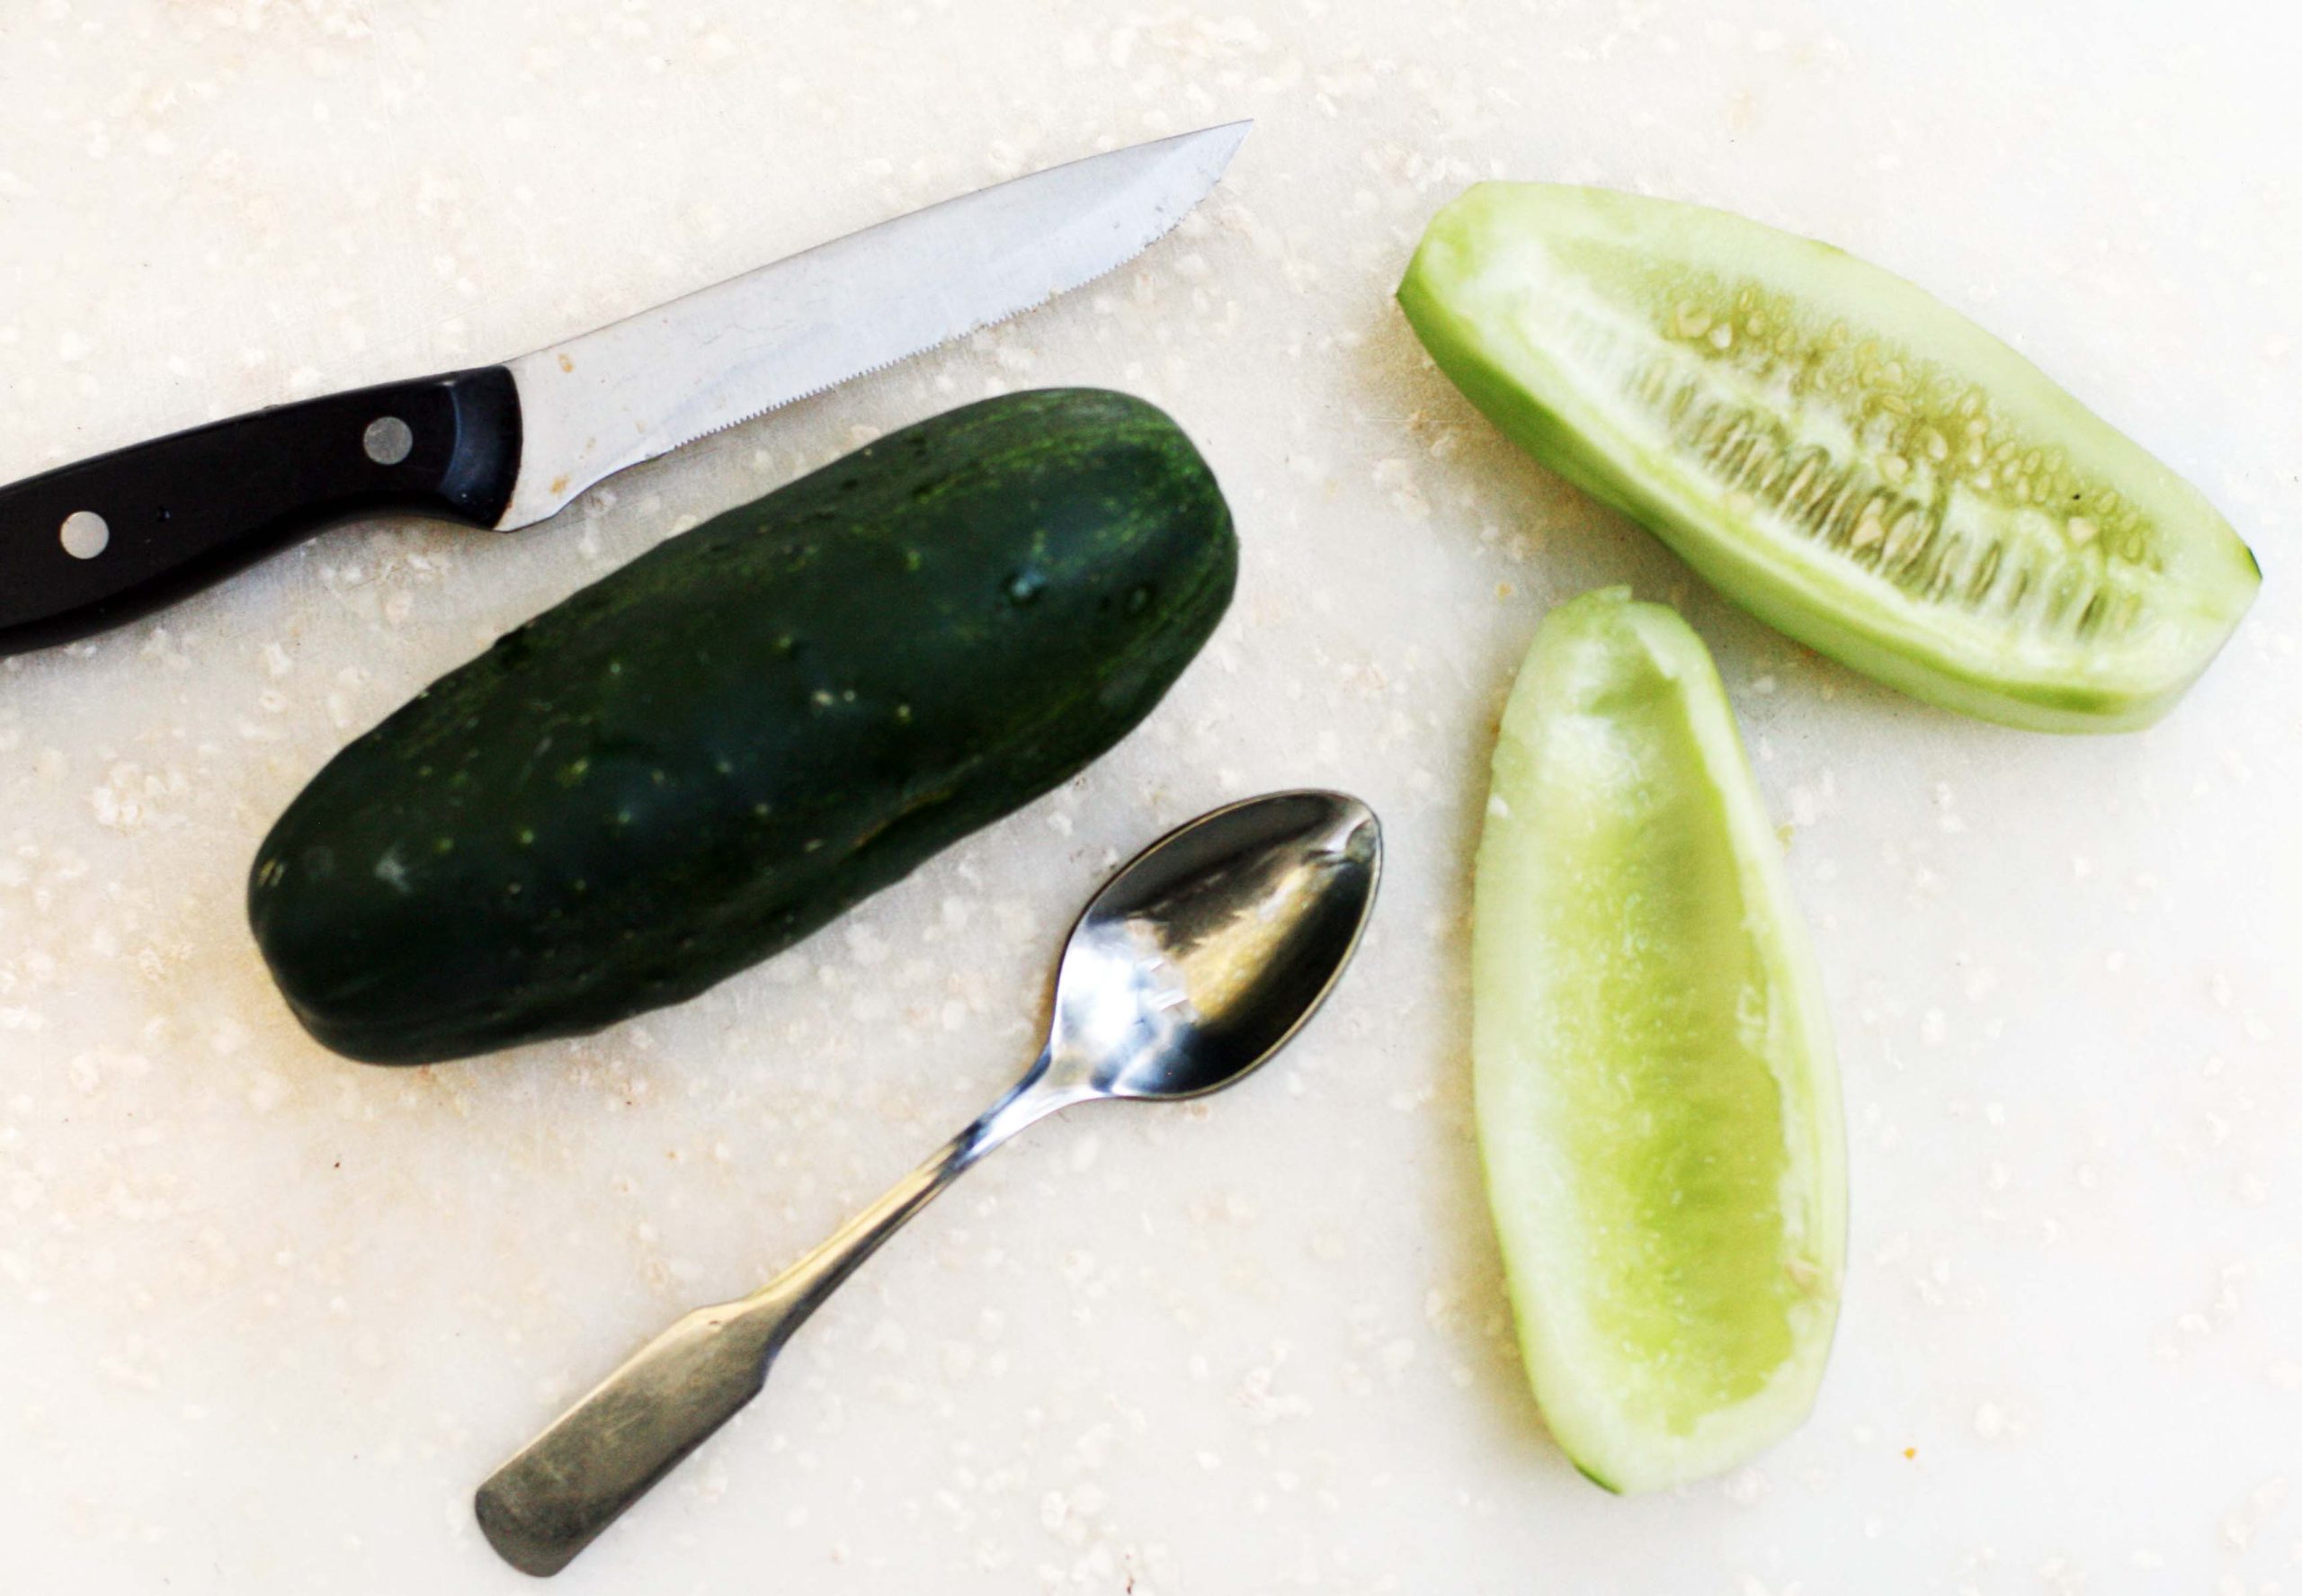 Cutting cucumbers and removing seeds to make homemade Christmas pickles.